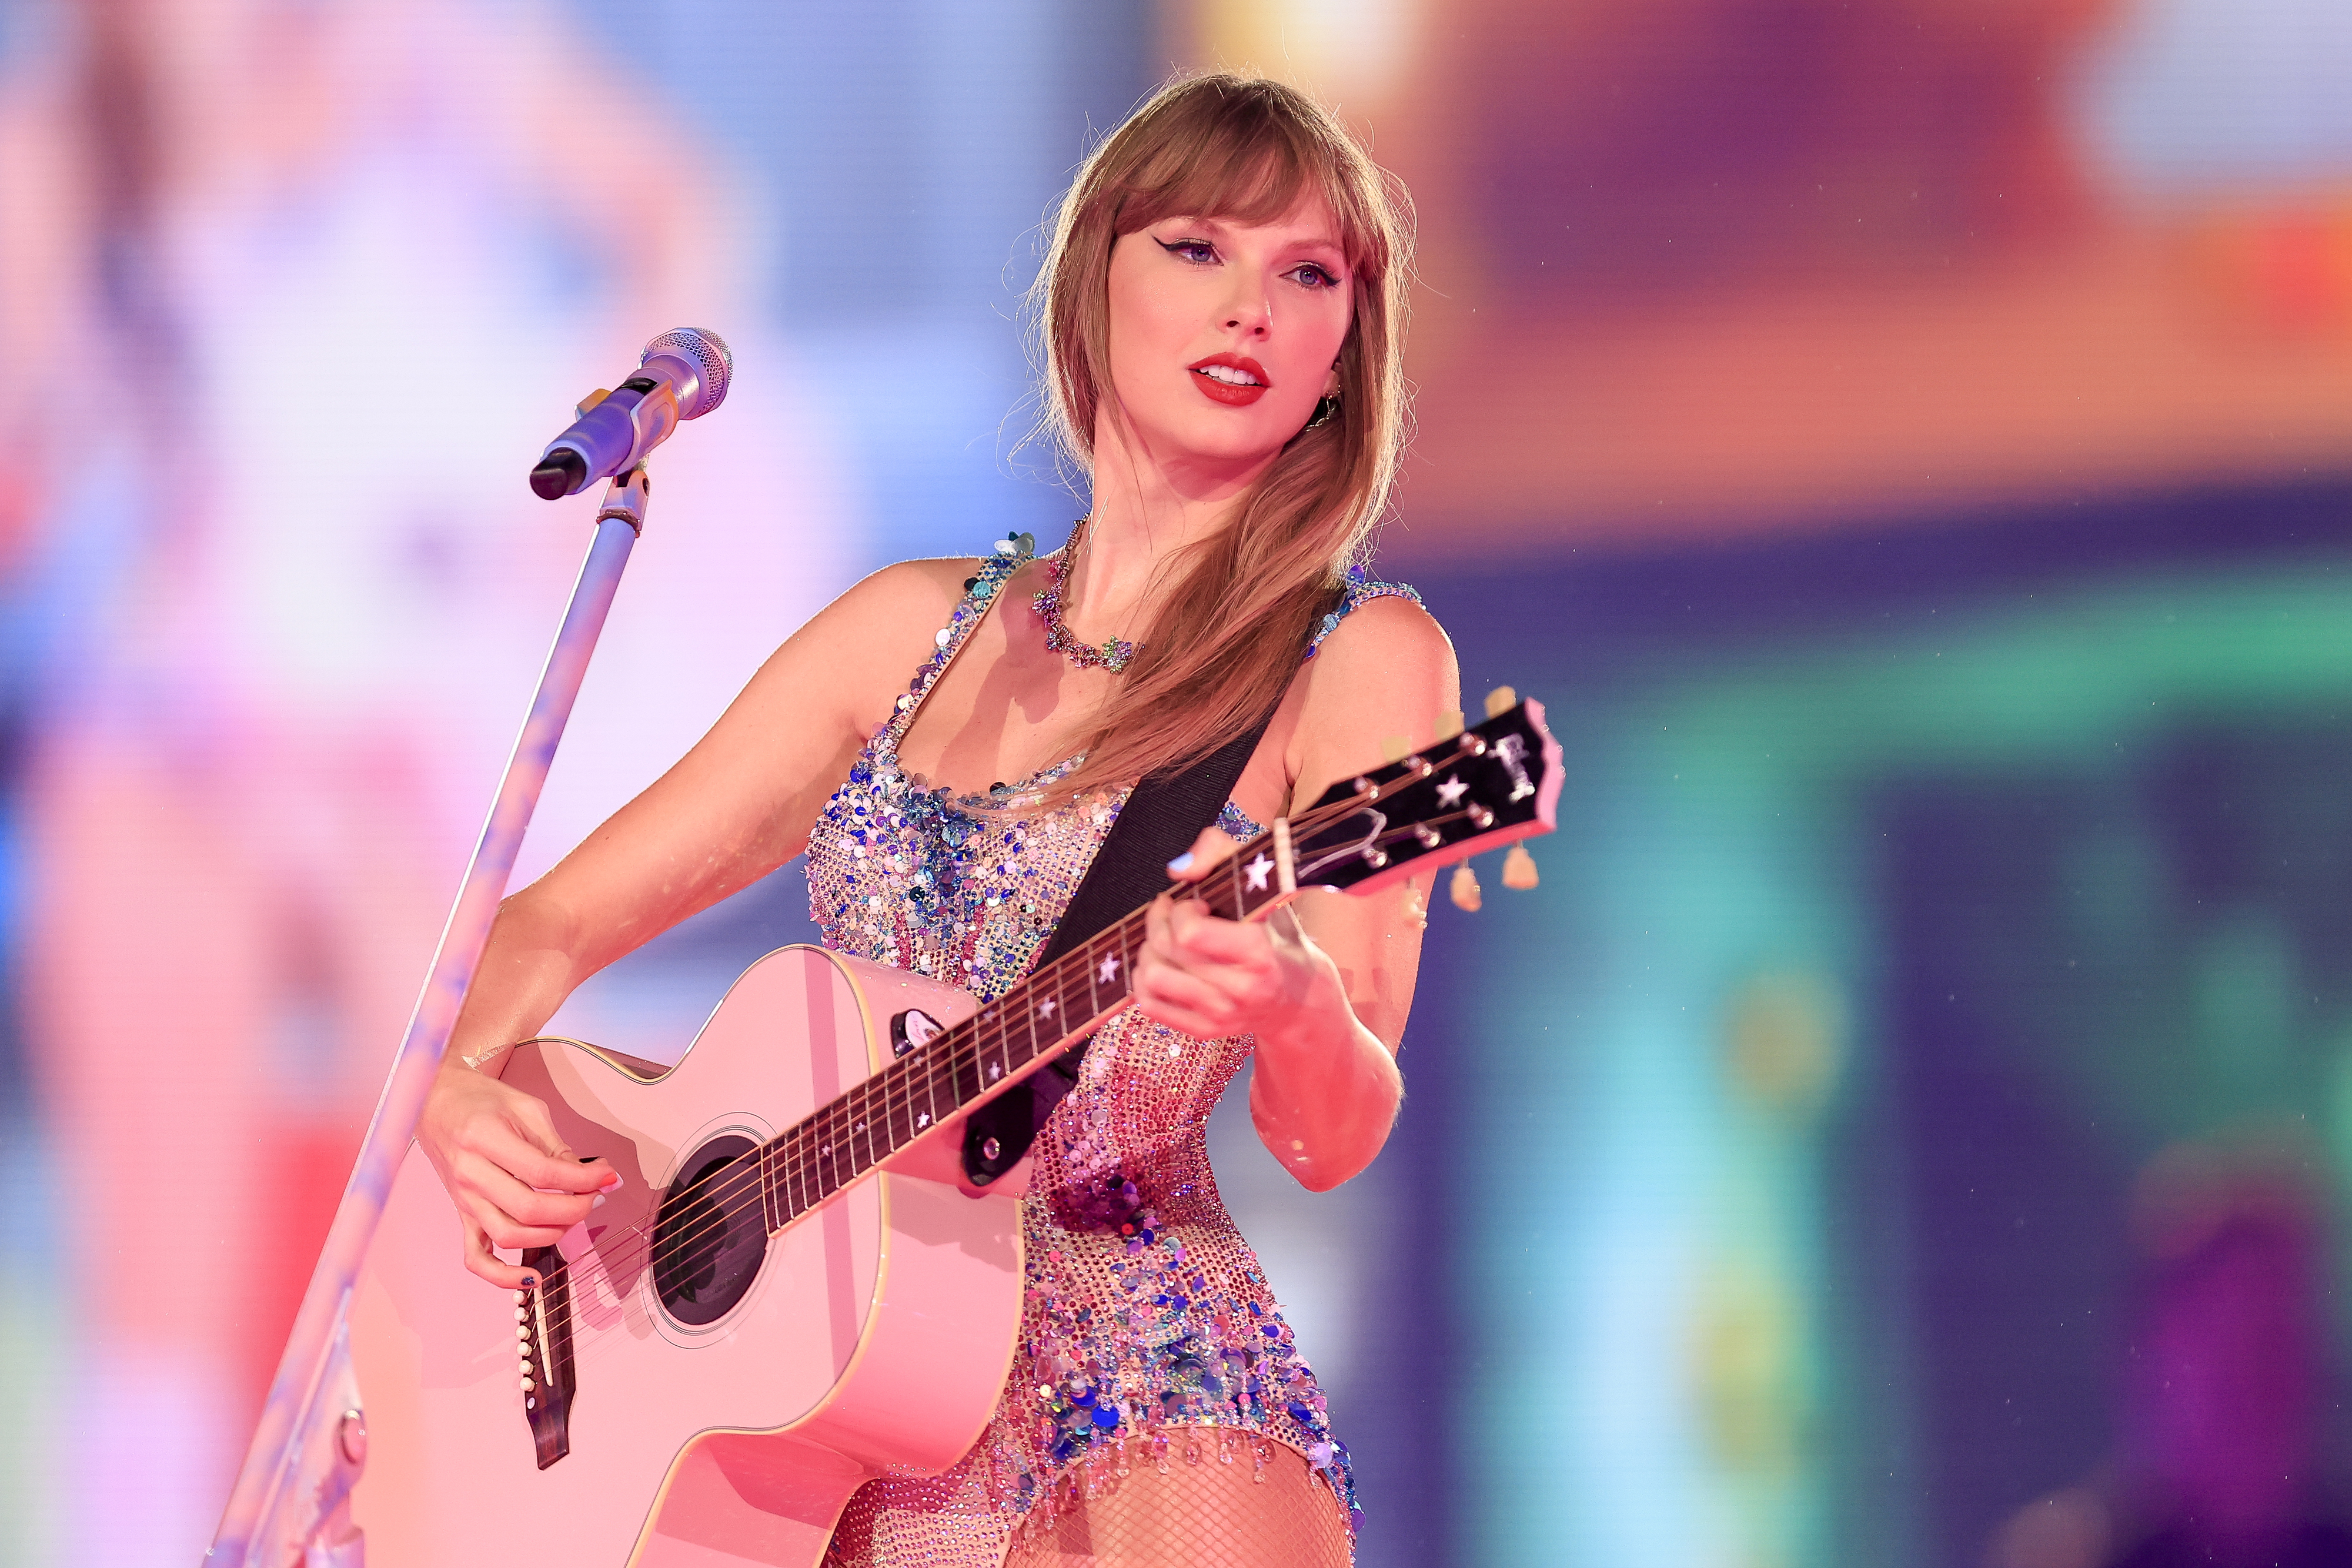 Taylor Swift performing with a guitar, wearing a sparkling dress